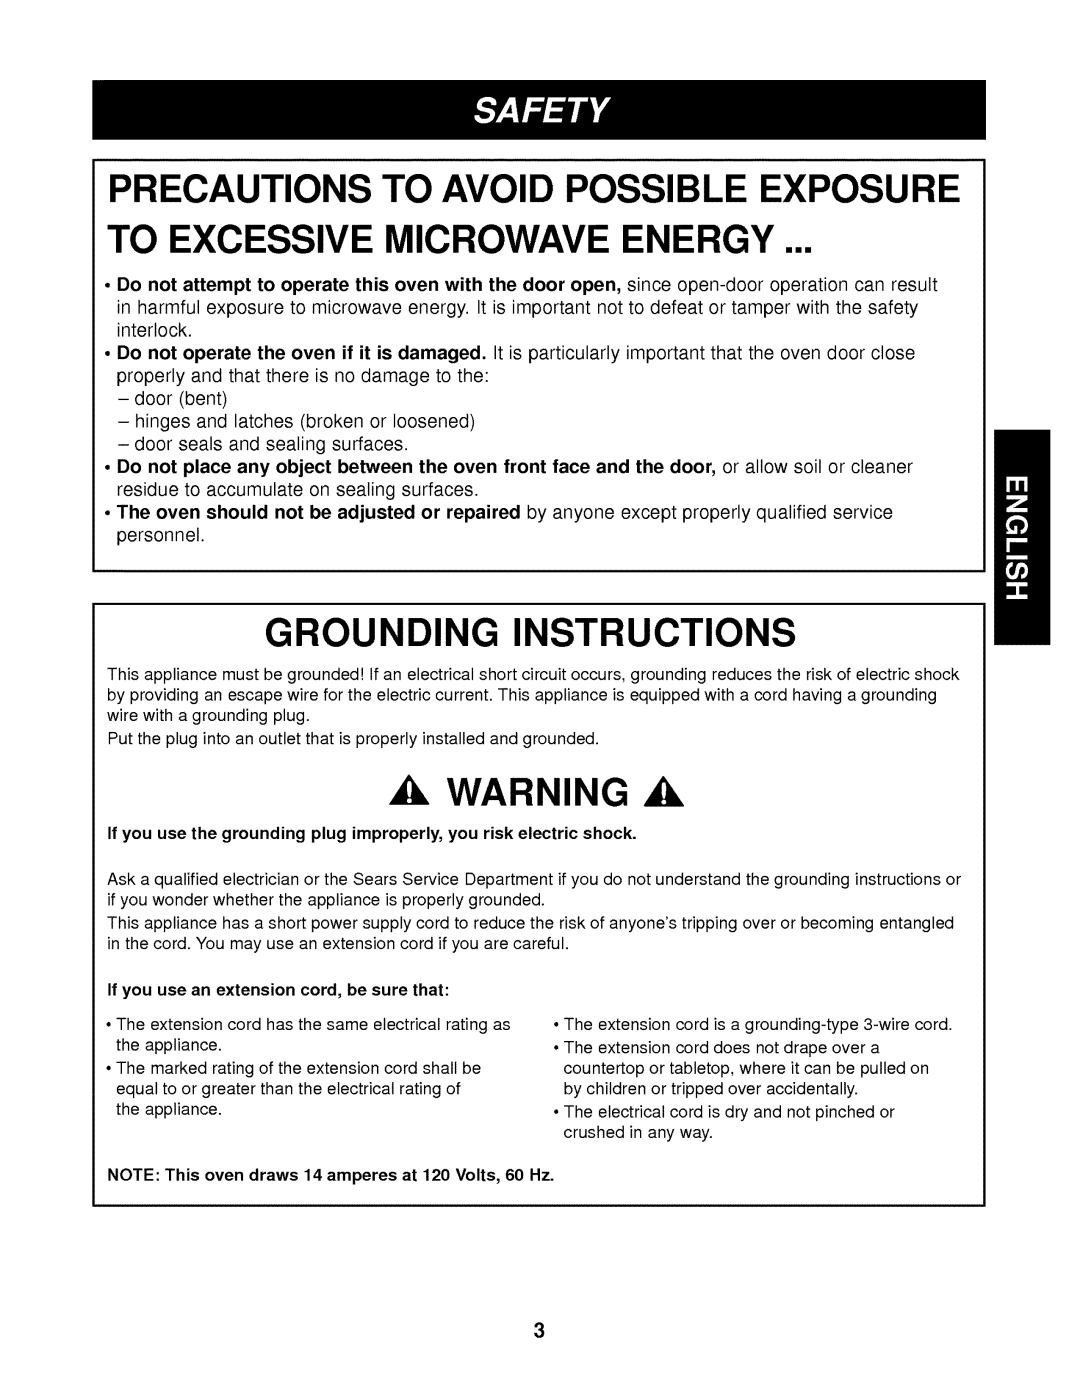 Kenmore 721.62342 manual Ak WARNING, Precautions To Avoid Possible Exposure, To Excessive Microwave Energy 